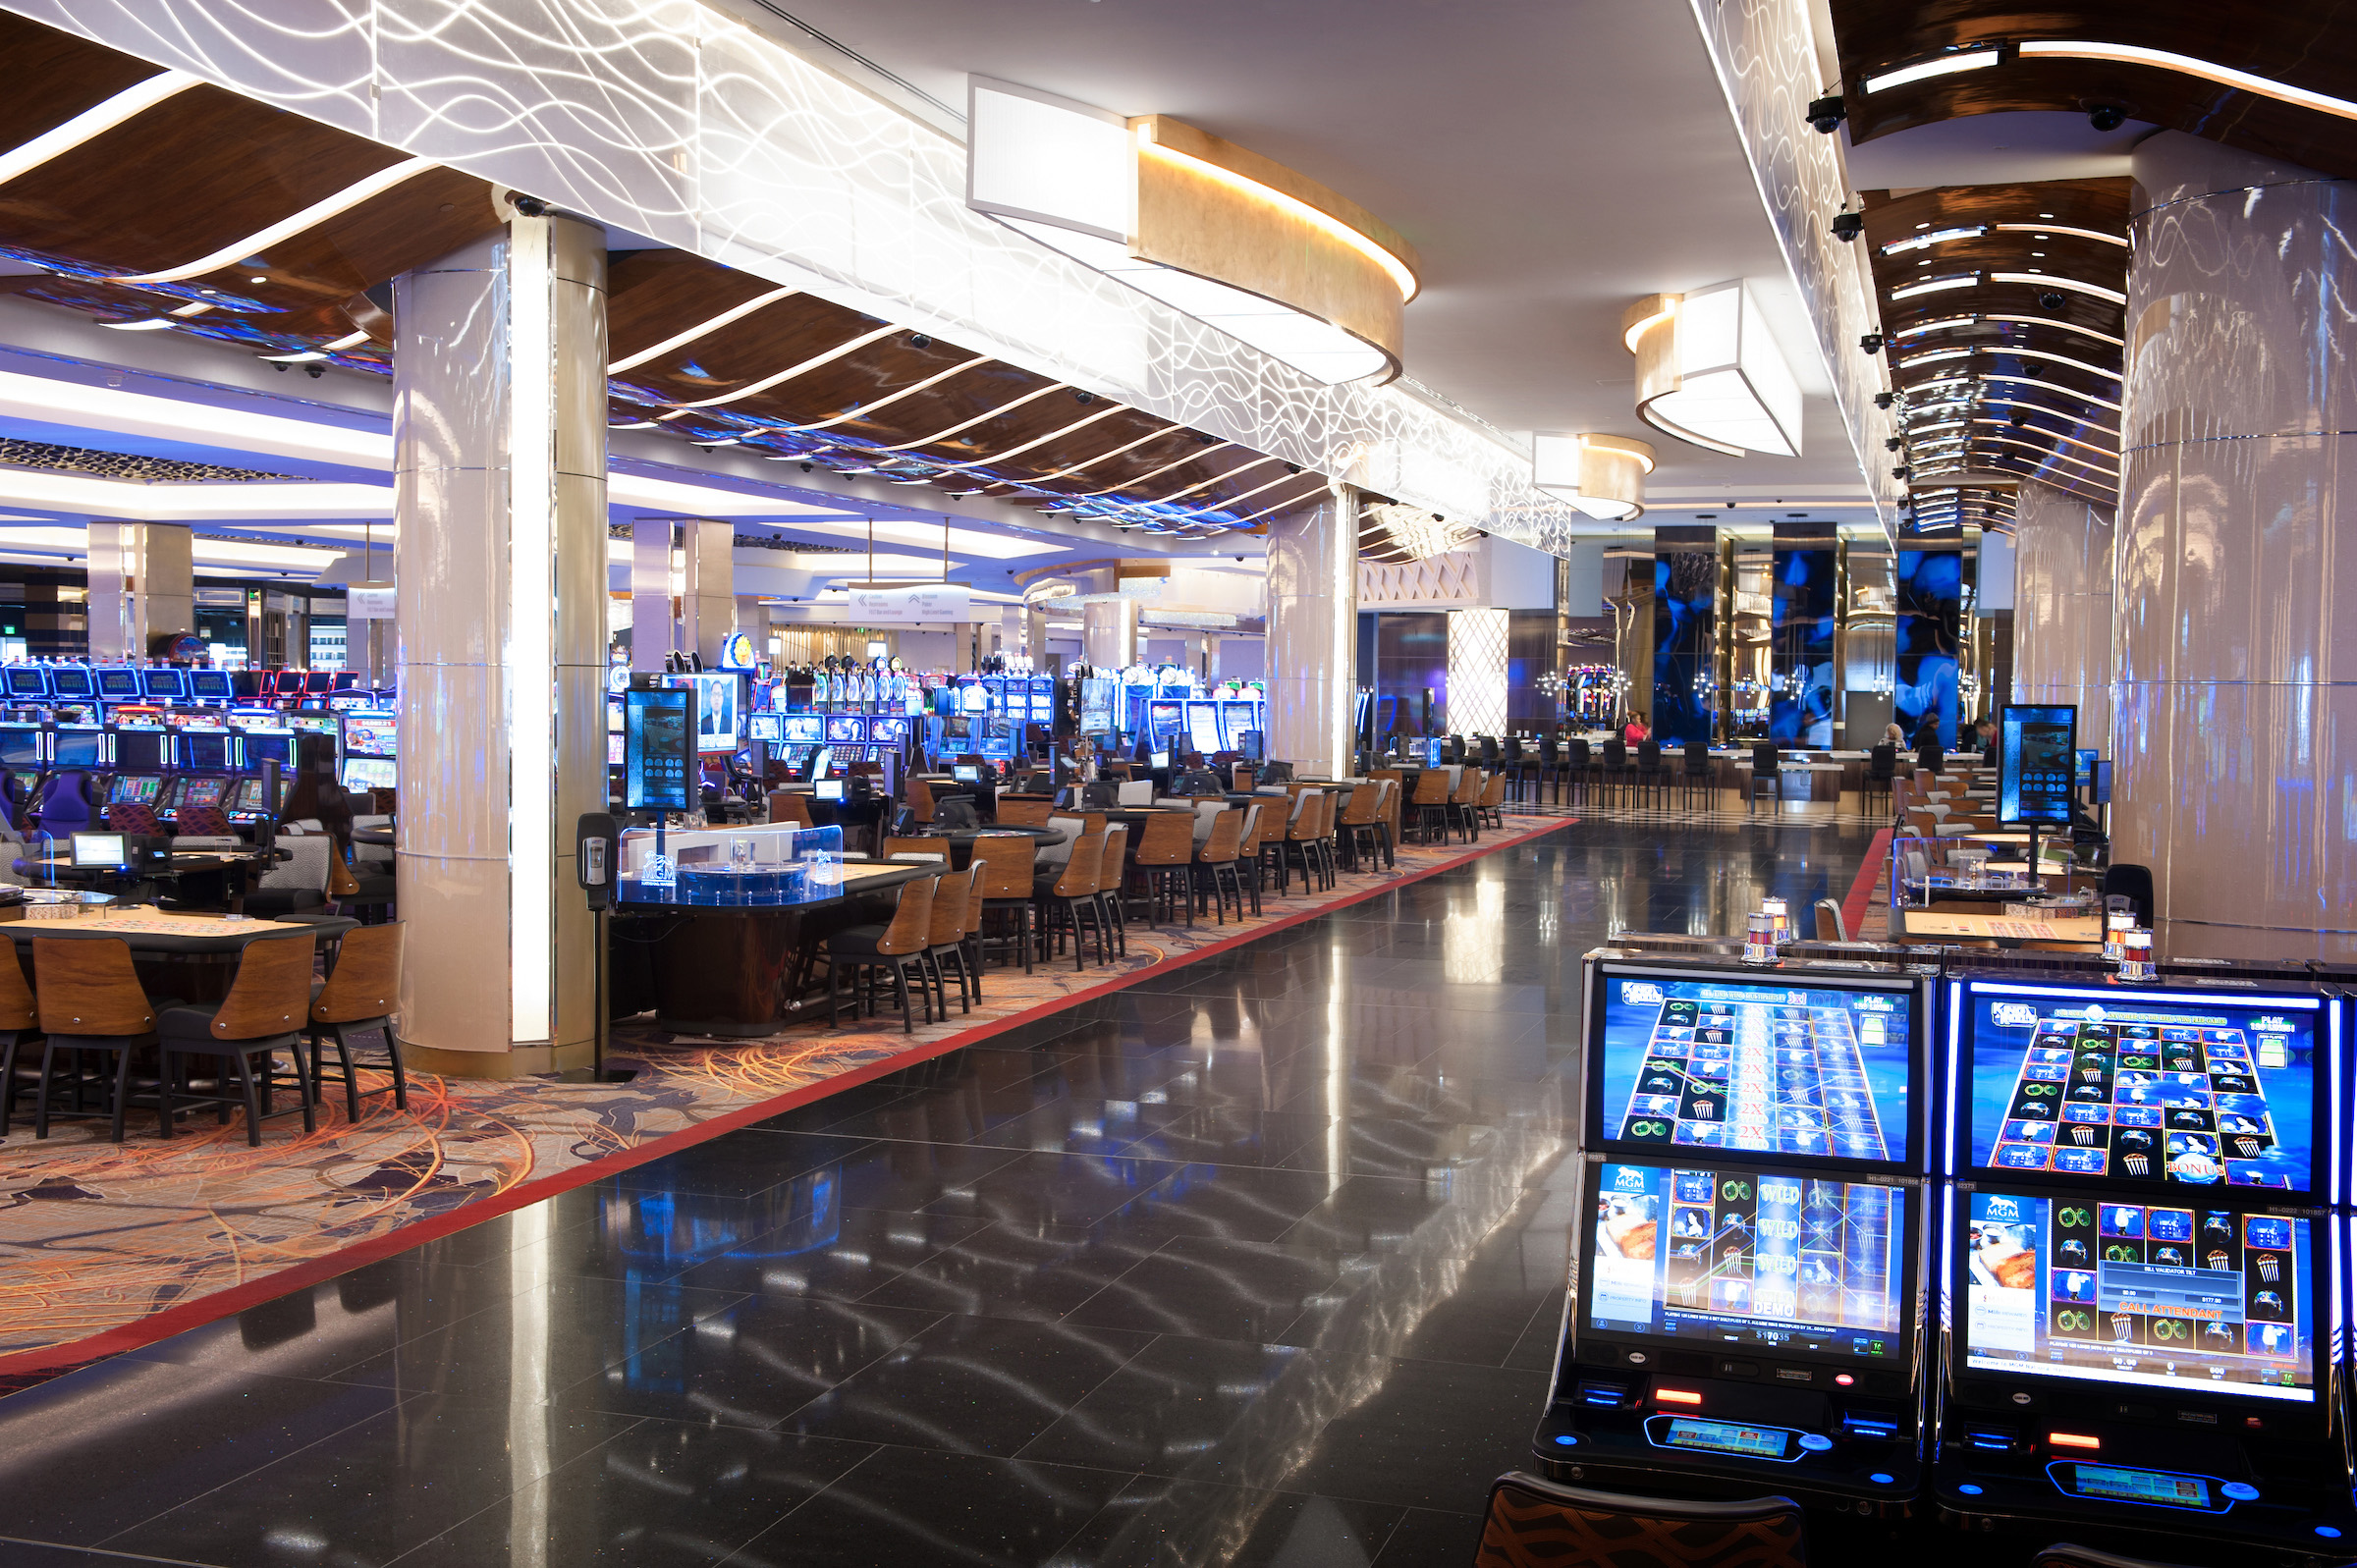 MGM National Harbor’s 125,000-square-foot casino floor offers hundreds of table games, dozens of poker tables and blackjack tables, 3,300 premium slot machines, an Asian gaming pit, luxury high-limit gaming and more.